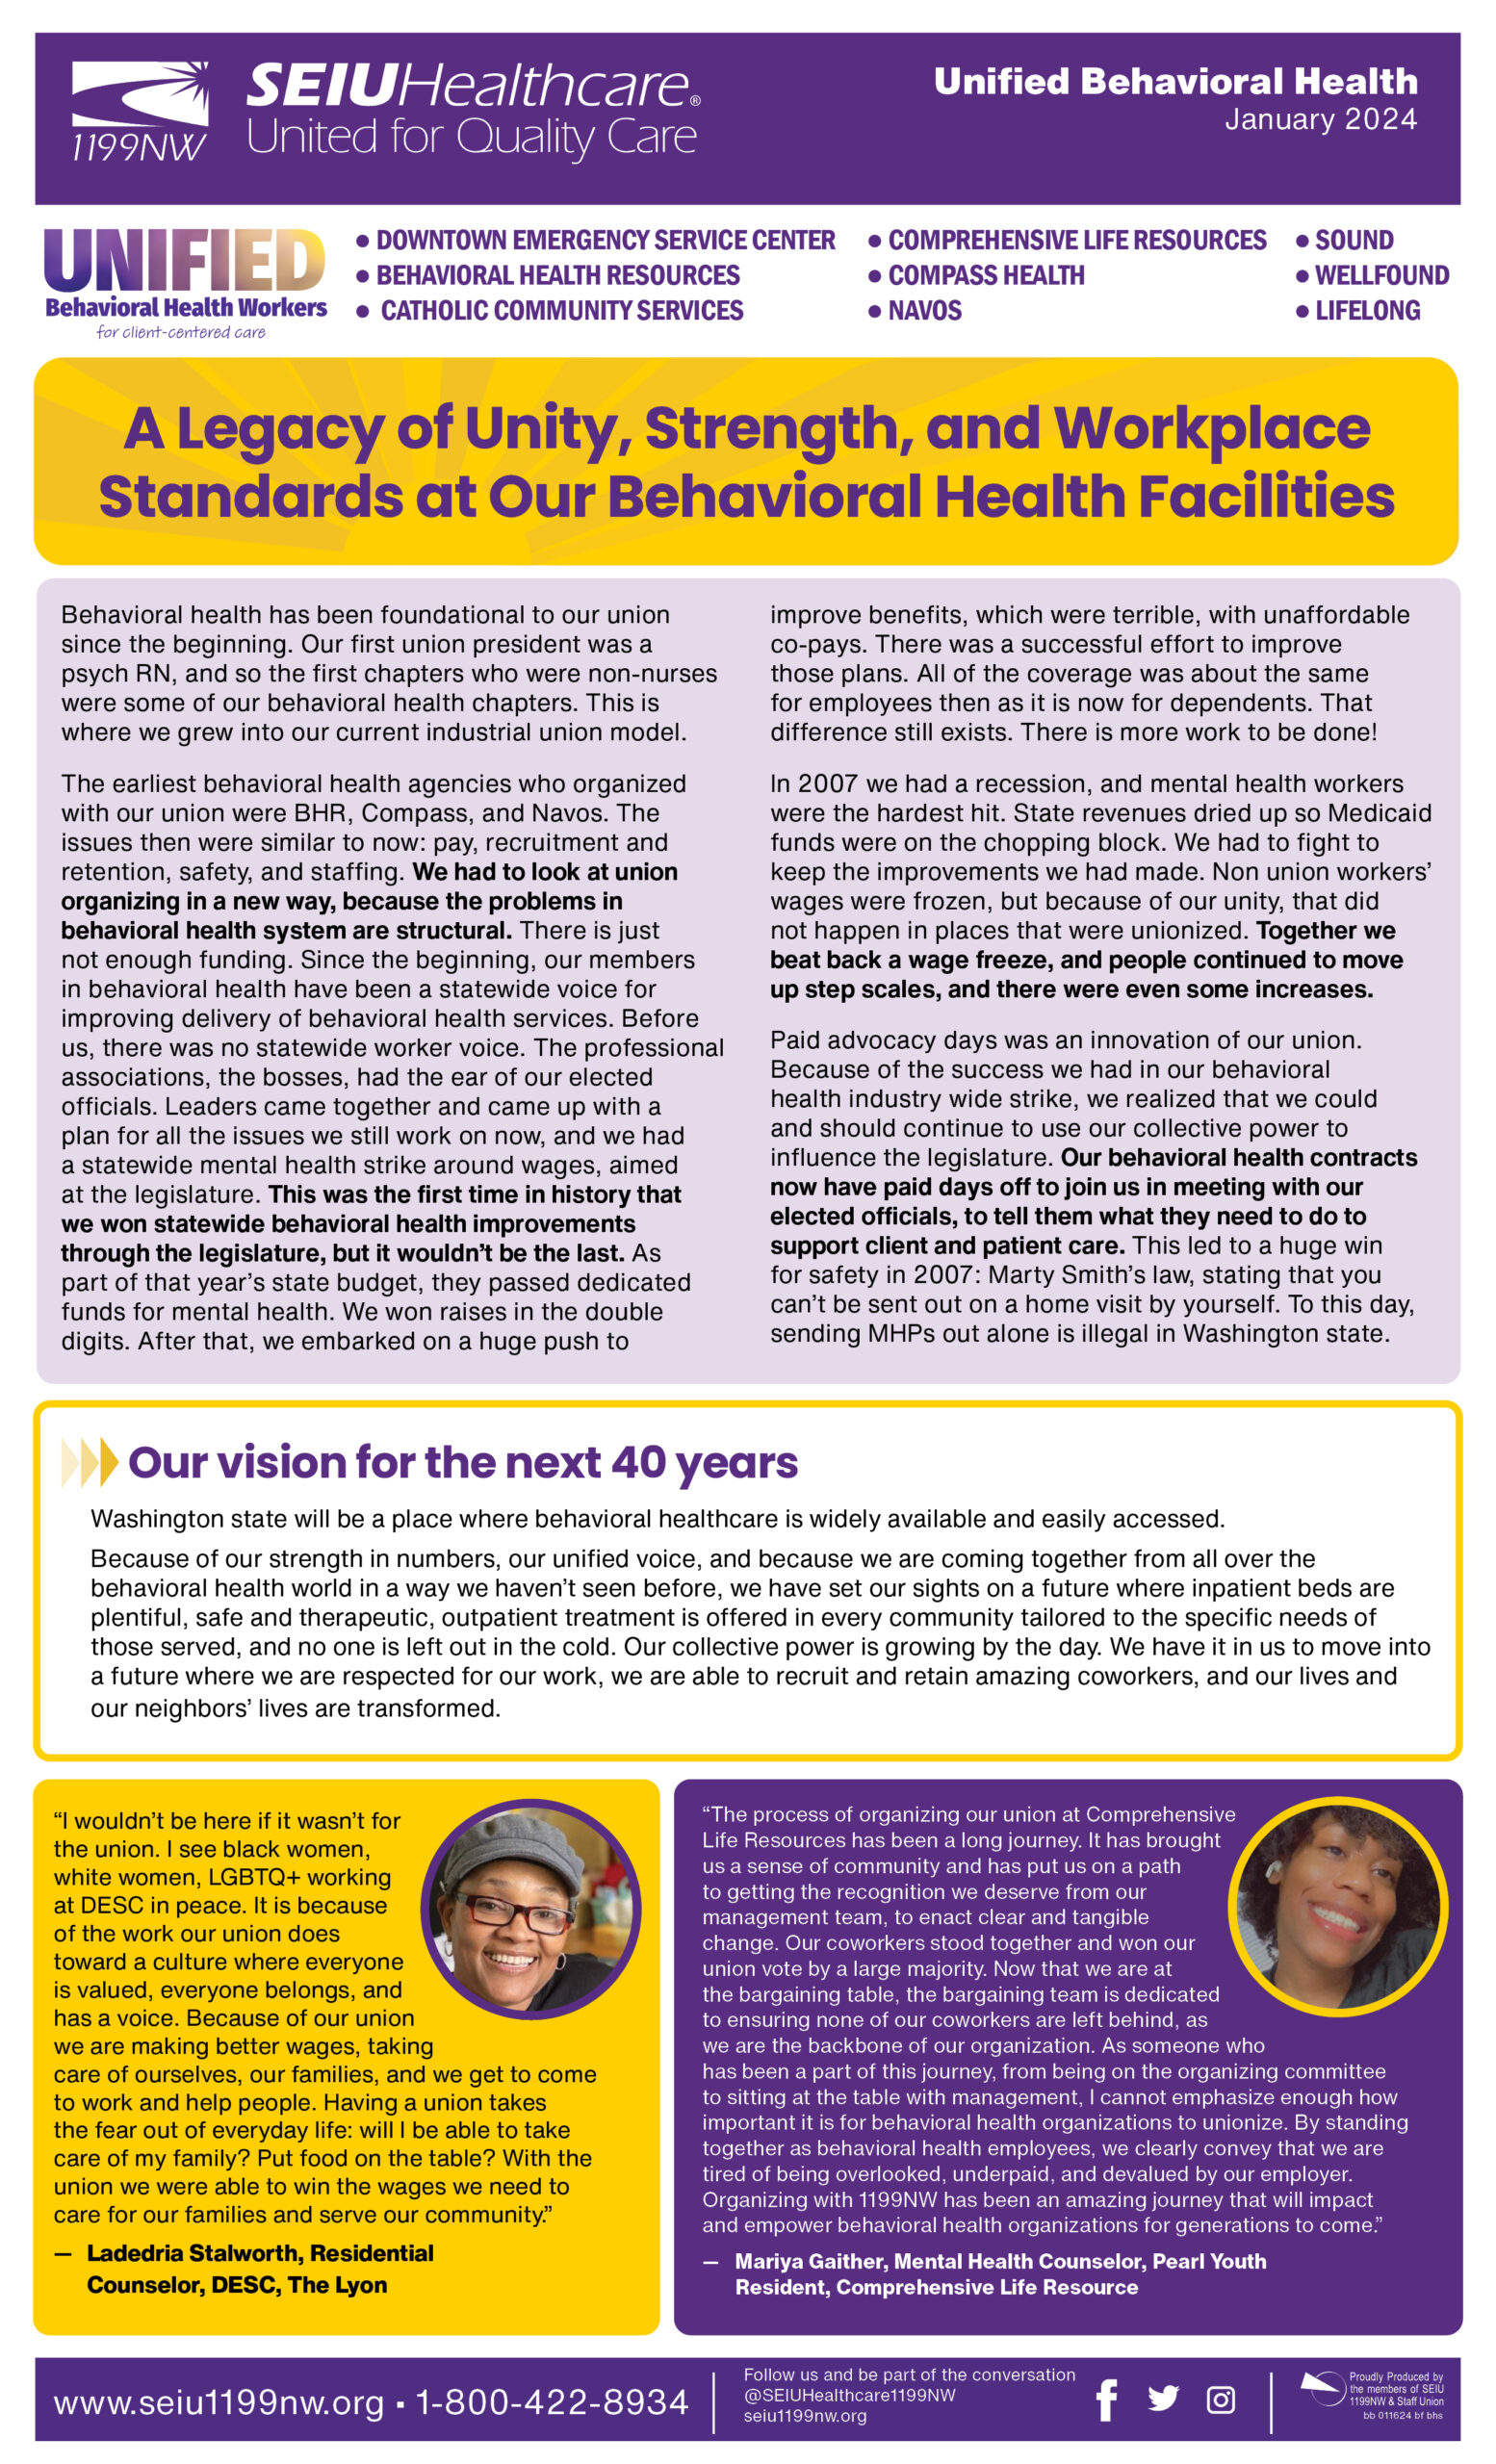 A Legacy of Unity, Strength, and Workplace Standards at Our Behavioral Health Facilities